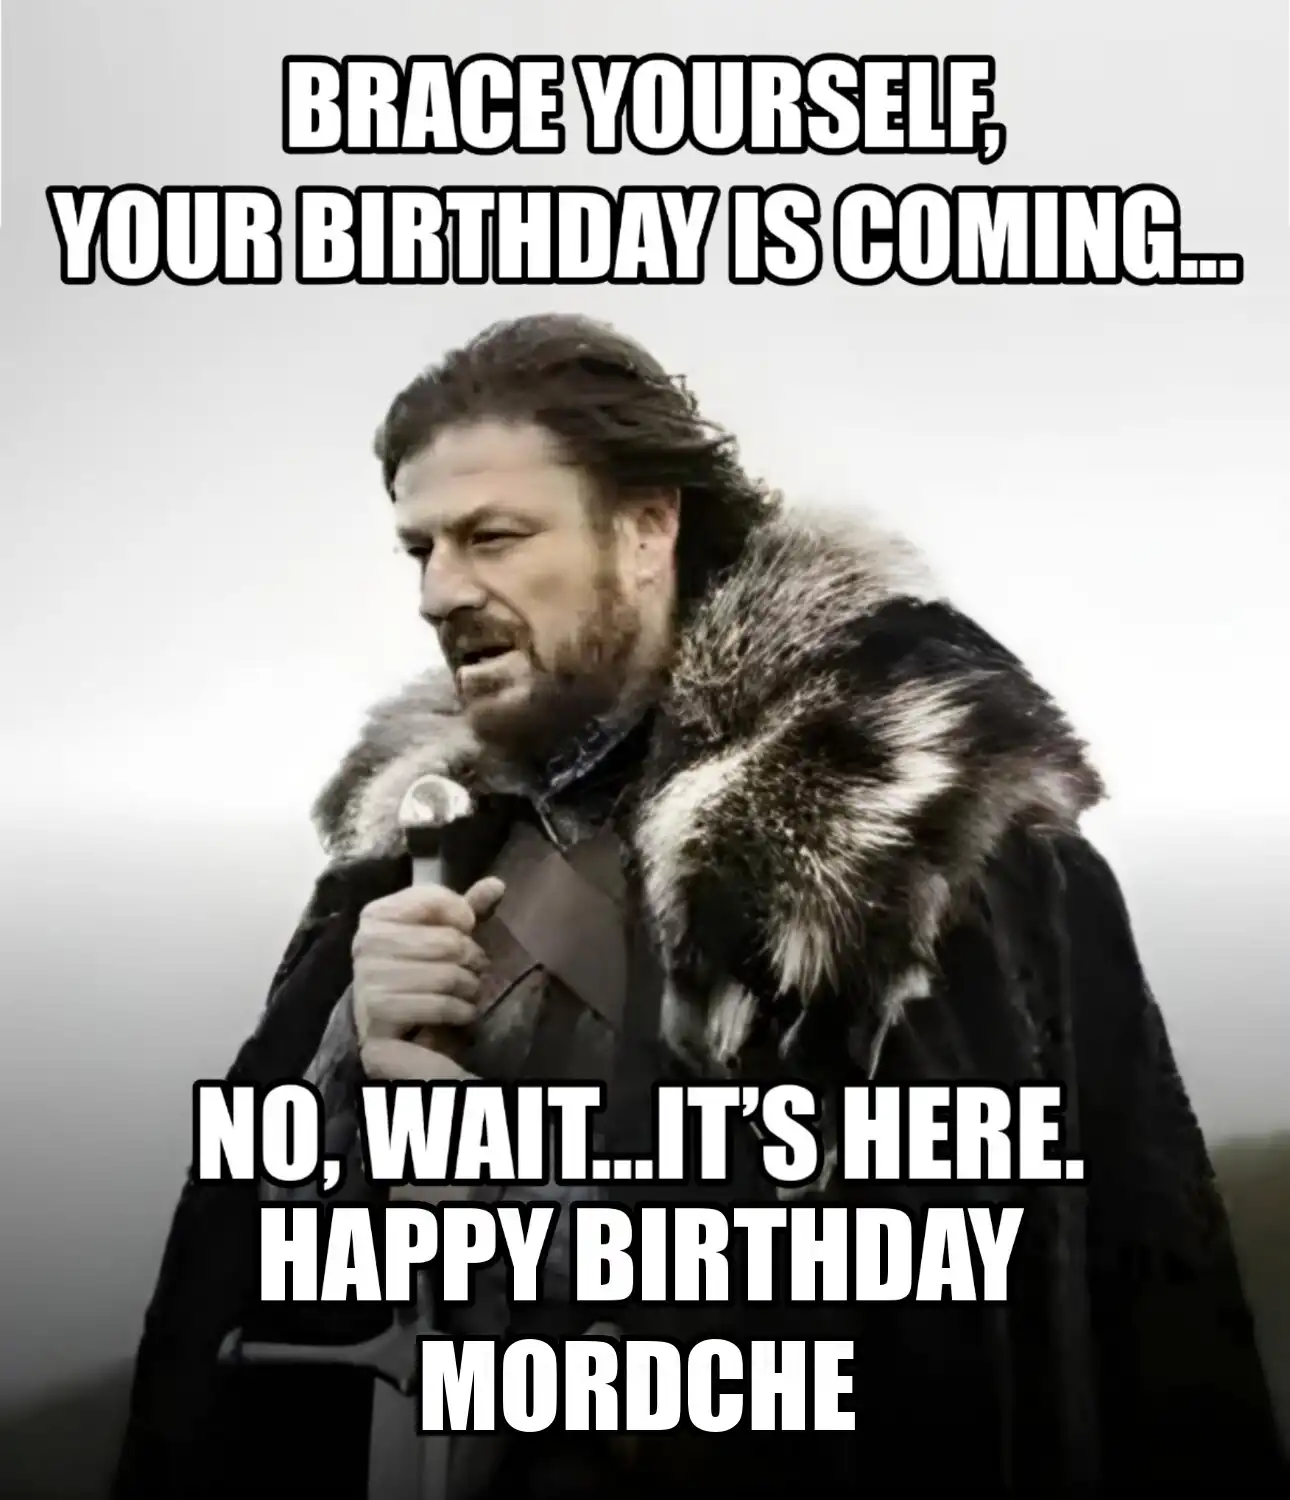 Happy Birthday Mordche Brace Yourself Your Birthday Is Coming Meme